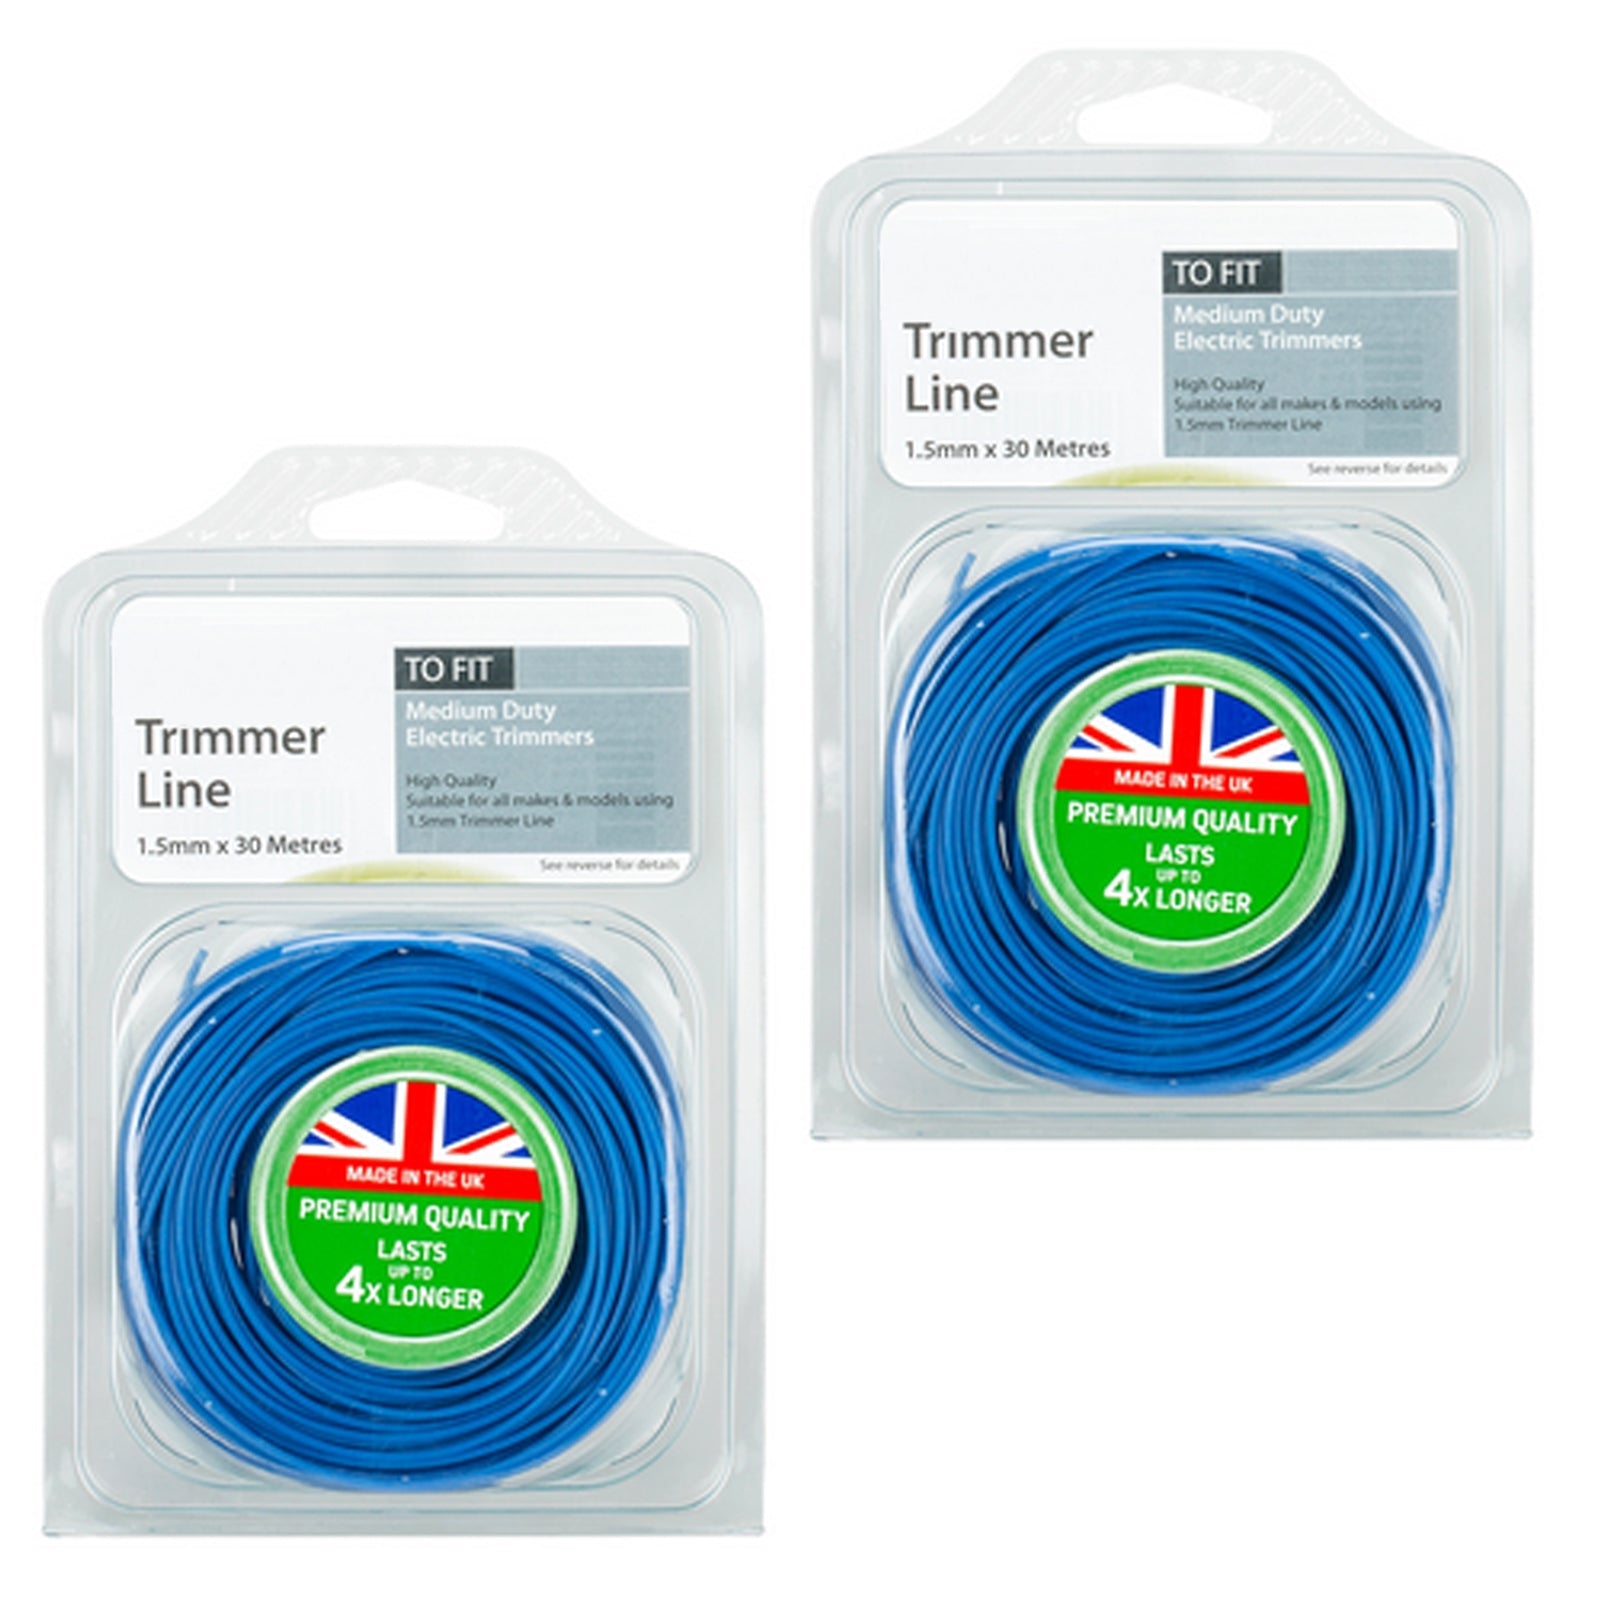 Trimmer Strimmer Line Spool Refill Cord 2 x 30m x 1.5mm Universal Blue Auto-Feed